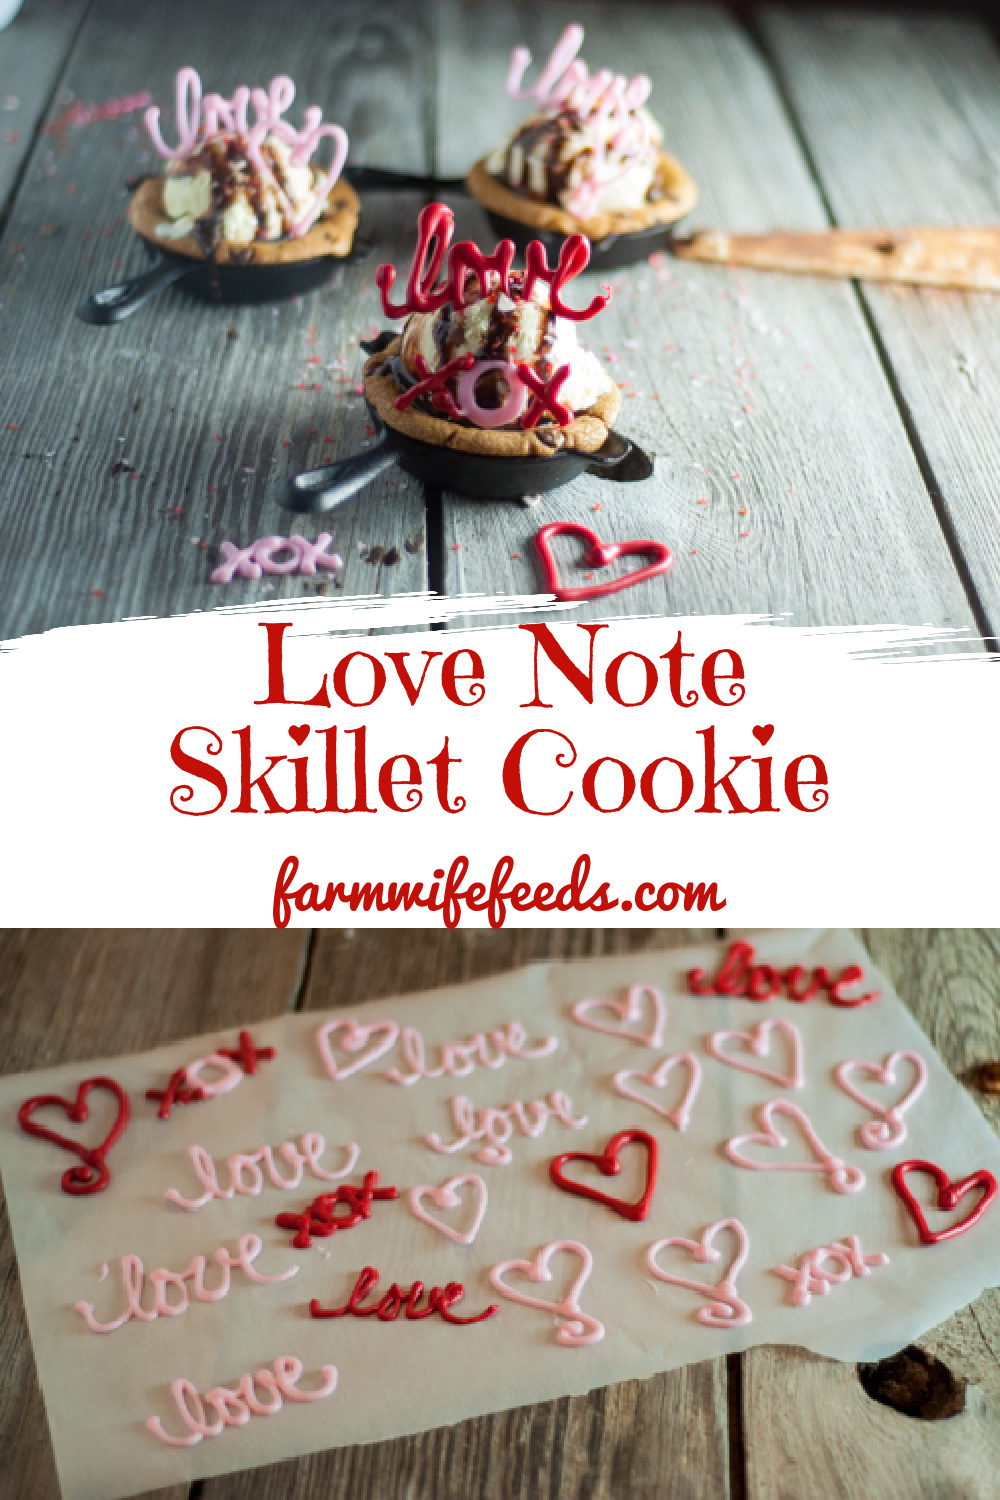 Love Note Skillet Cookies from Farmwife Feeds are a fun way to get the whole family involved in an inexpensive fun Valentines Day Treat! #valentine #cookie #chocolate